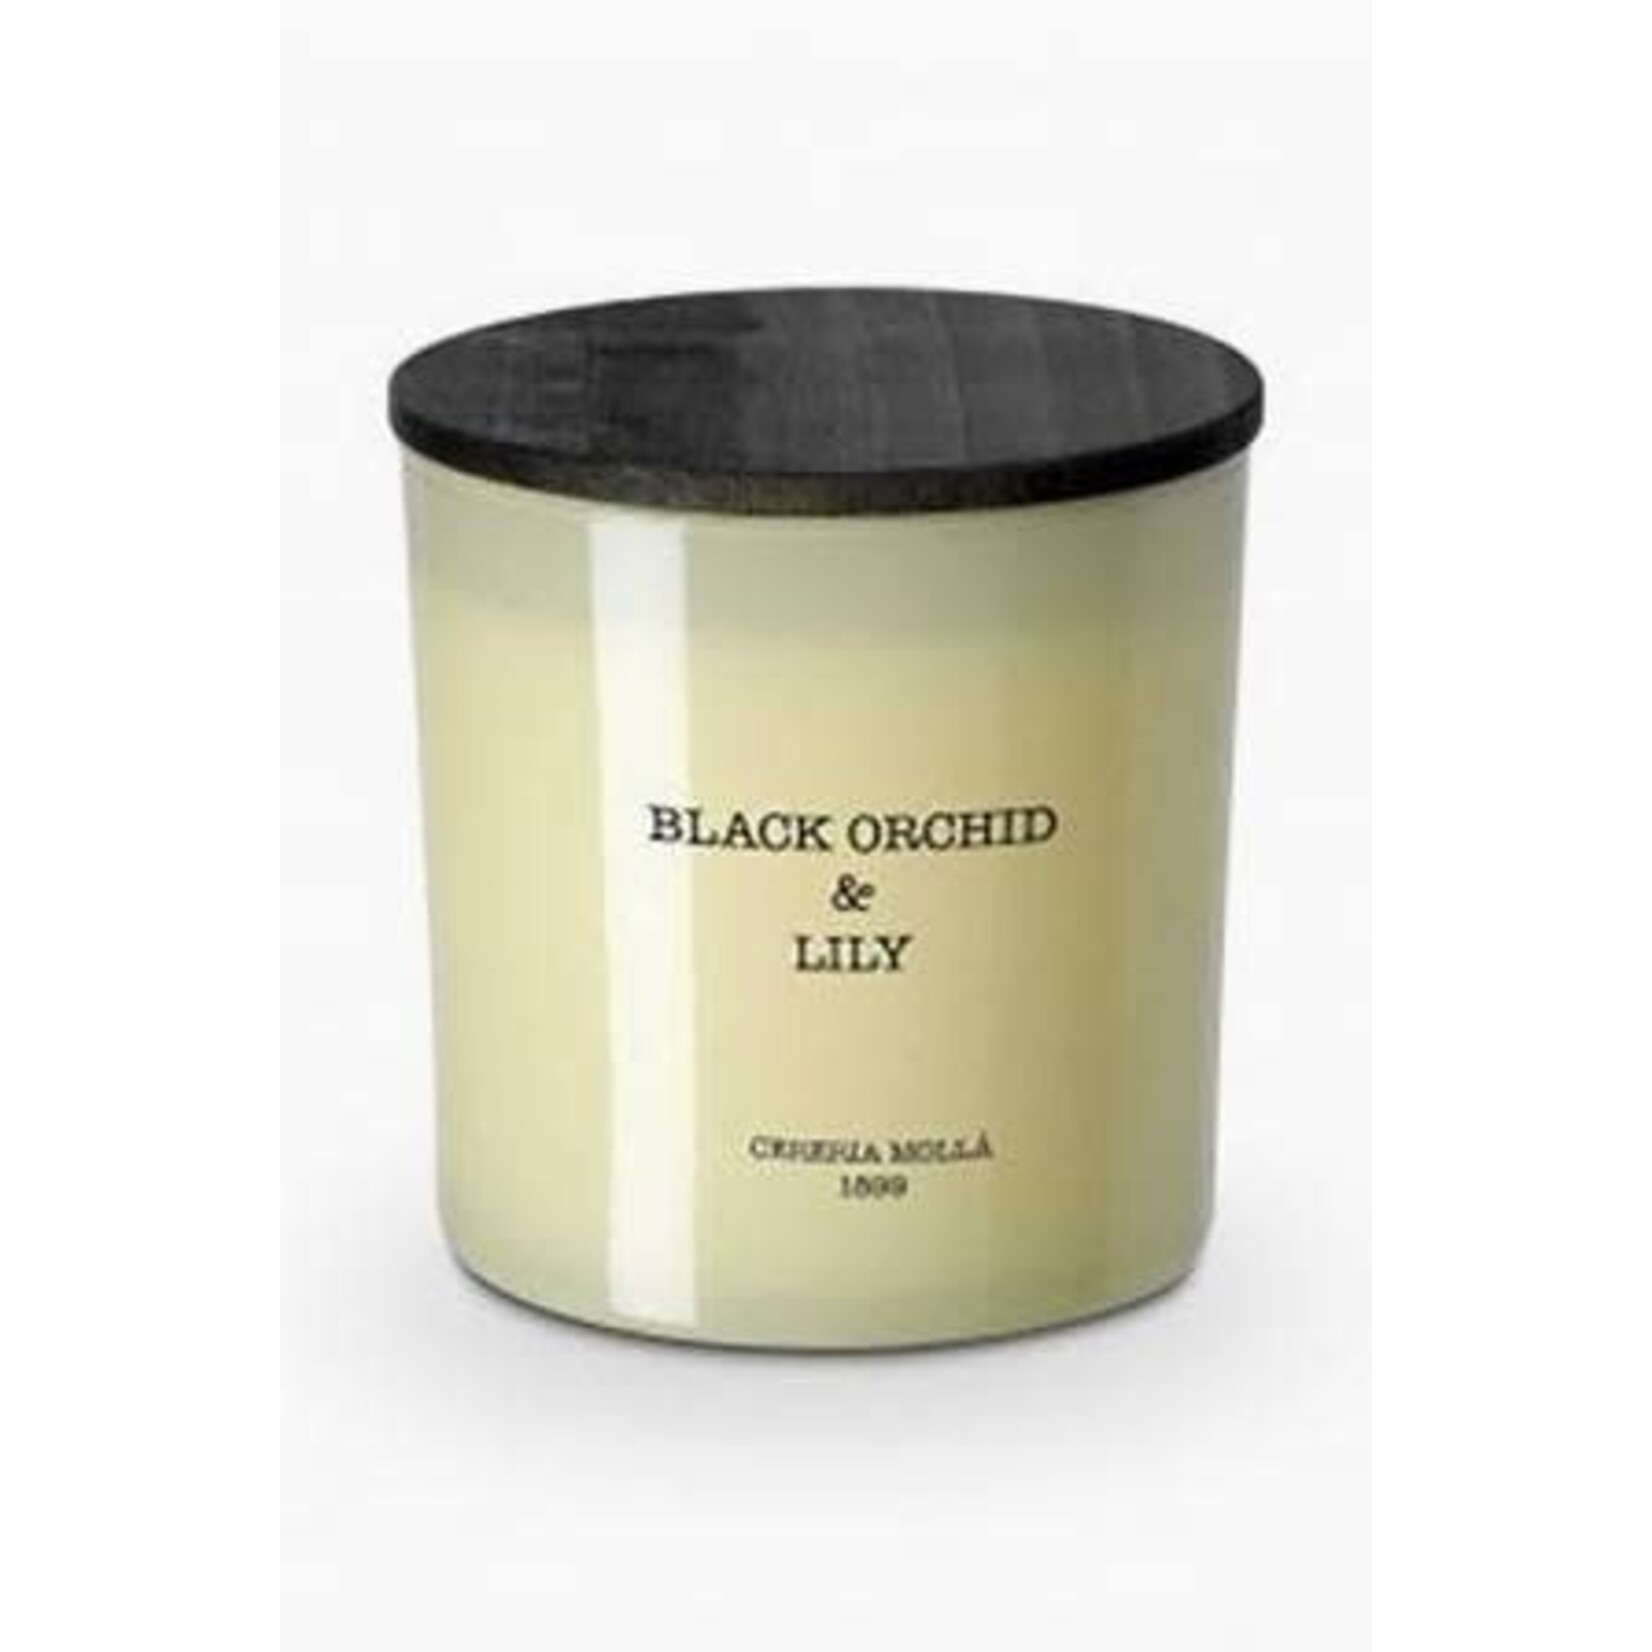 Cereria Molla Black Orchid & Lily 3 Wick XL Candle